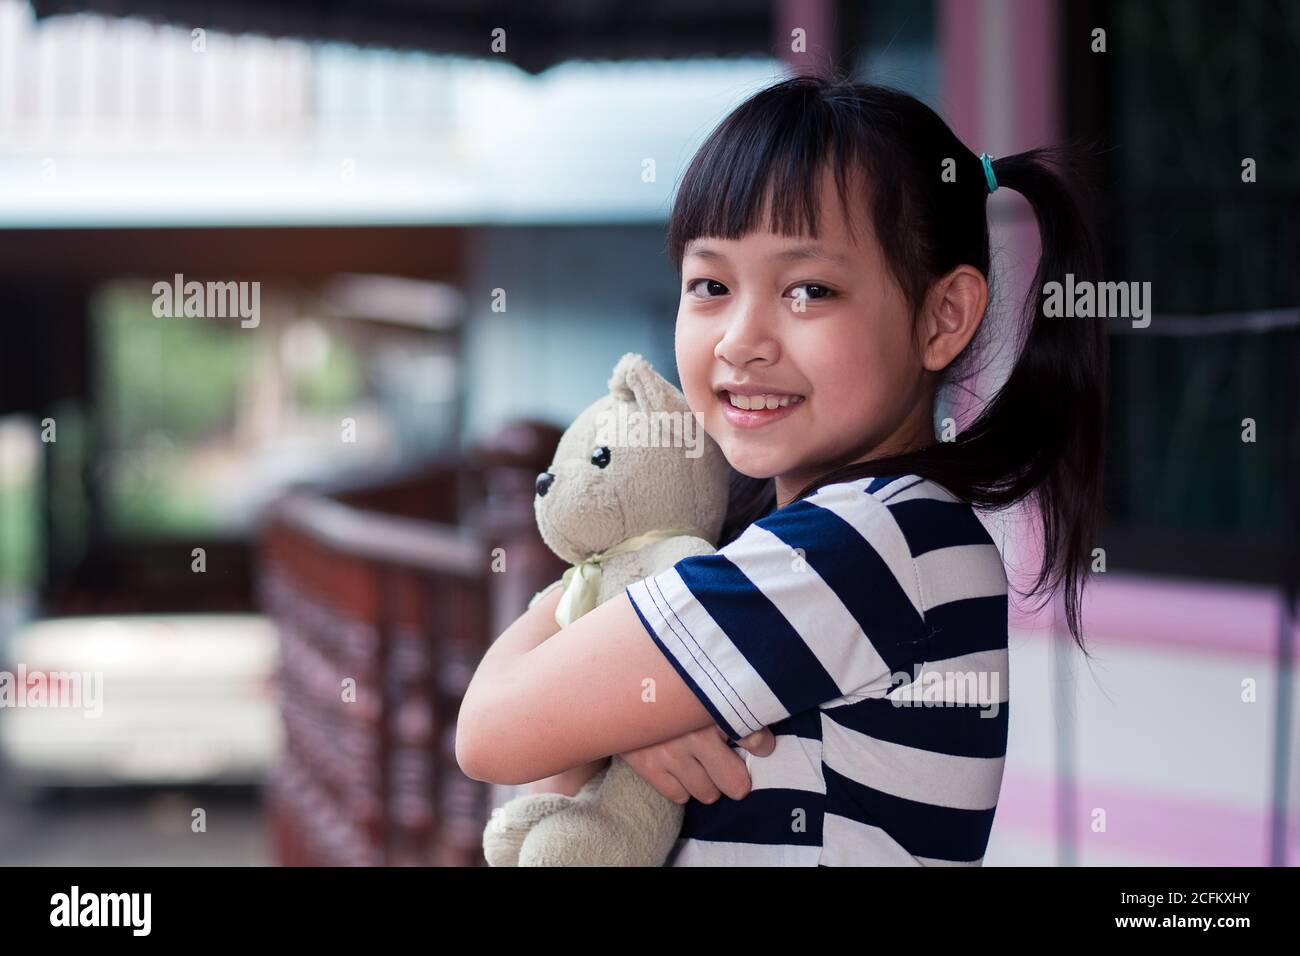 Smile little child girl holding teddy bear with love Stock Photo